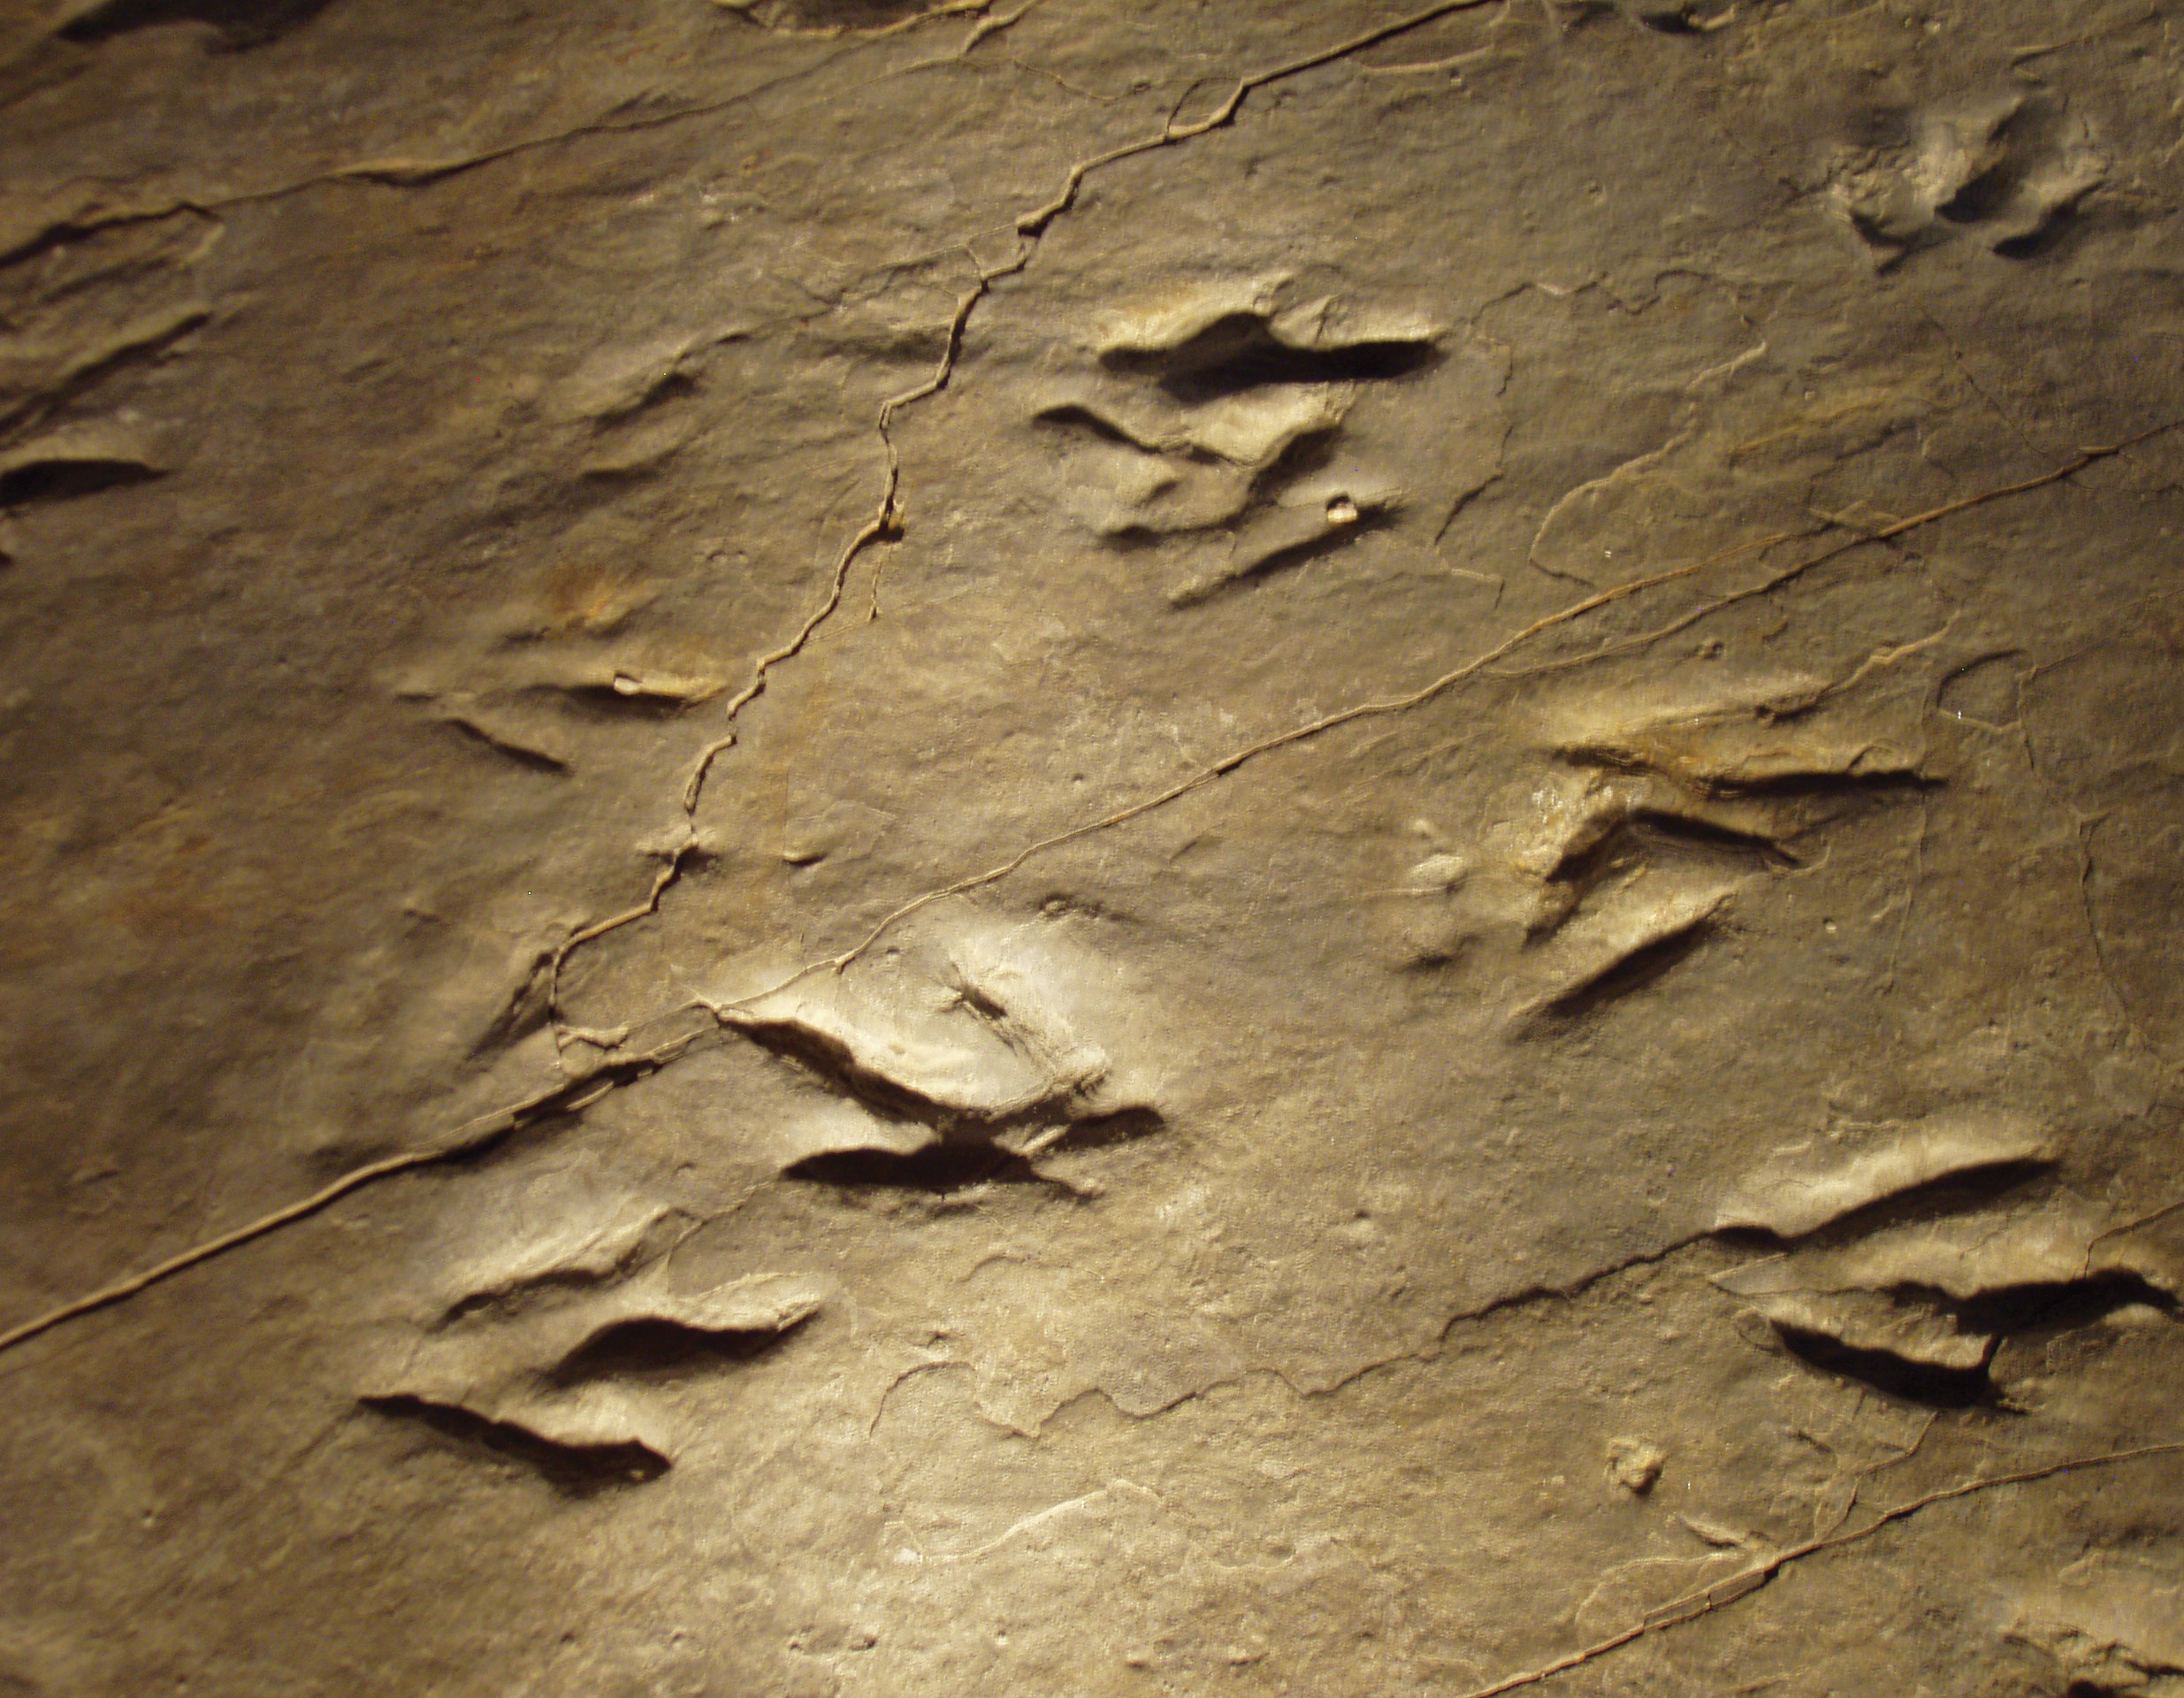 Eubrontes fossil footprints in Rocky Hill, Connecticut.